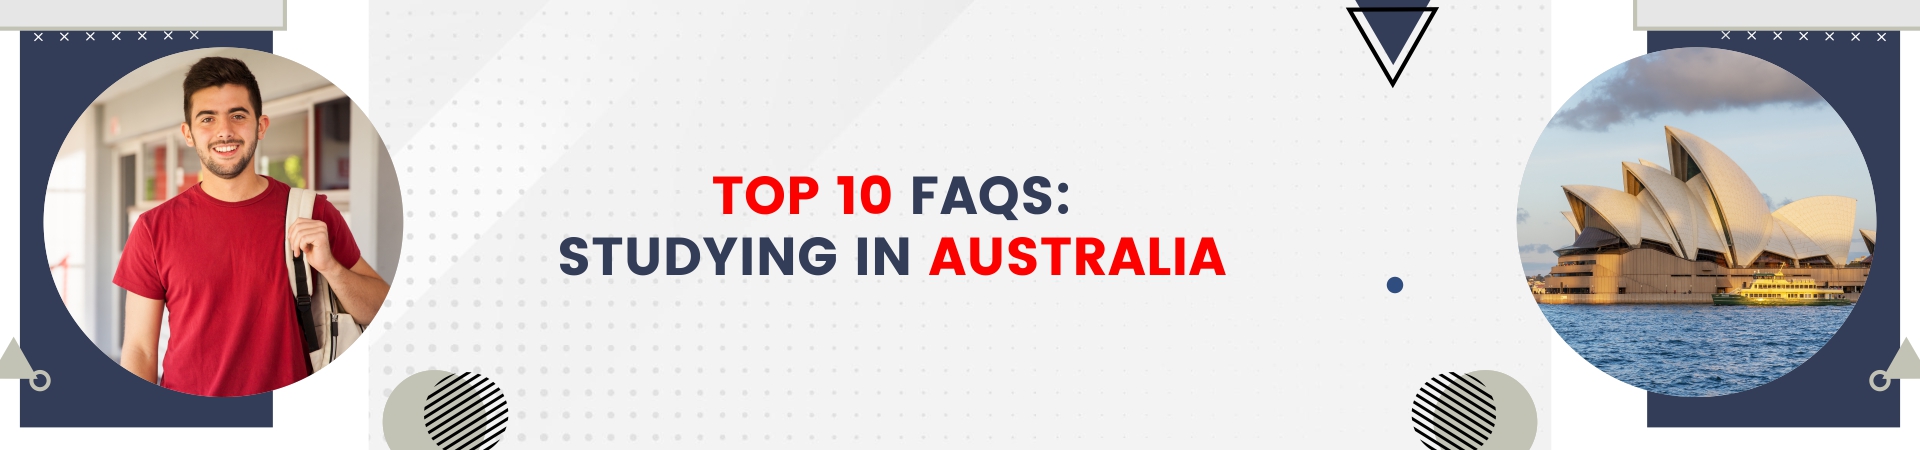 Top 10 FAQs: Studying in Australia